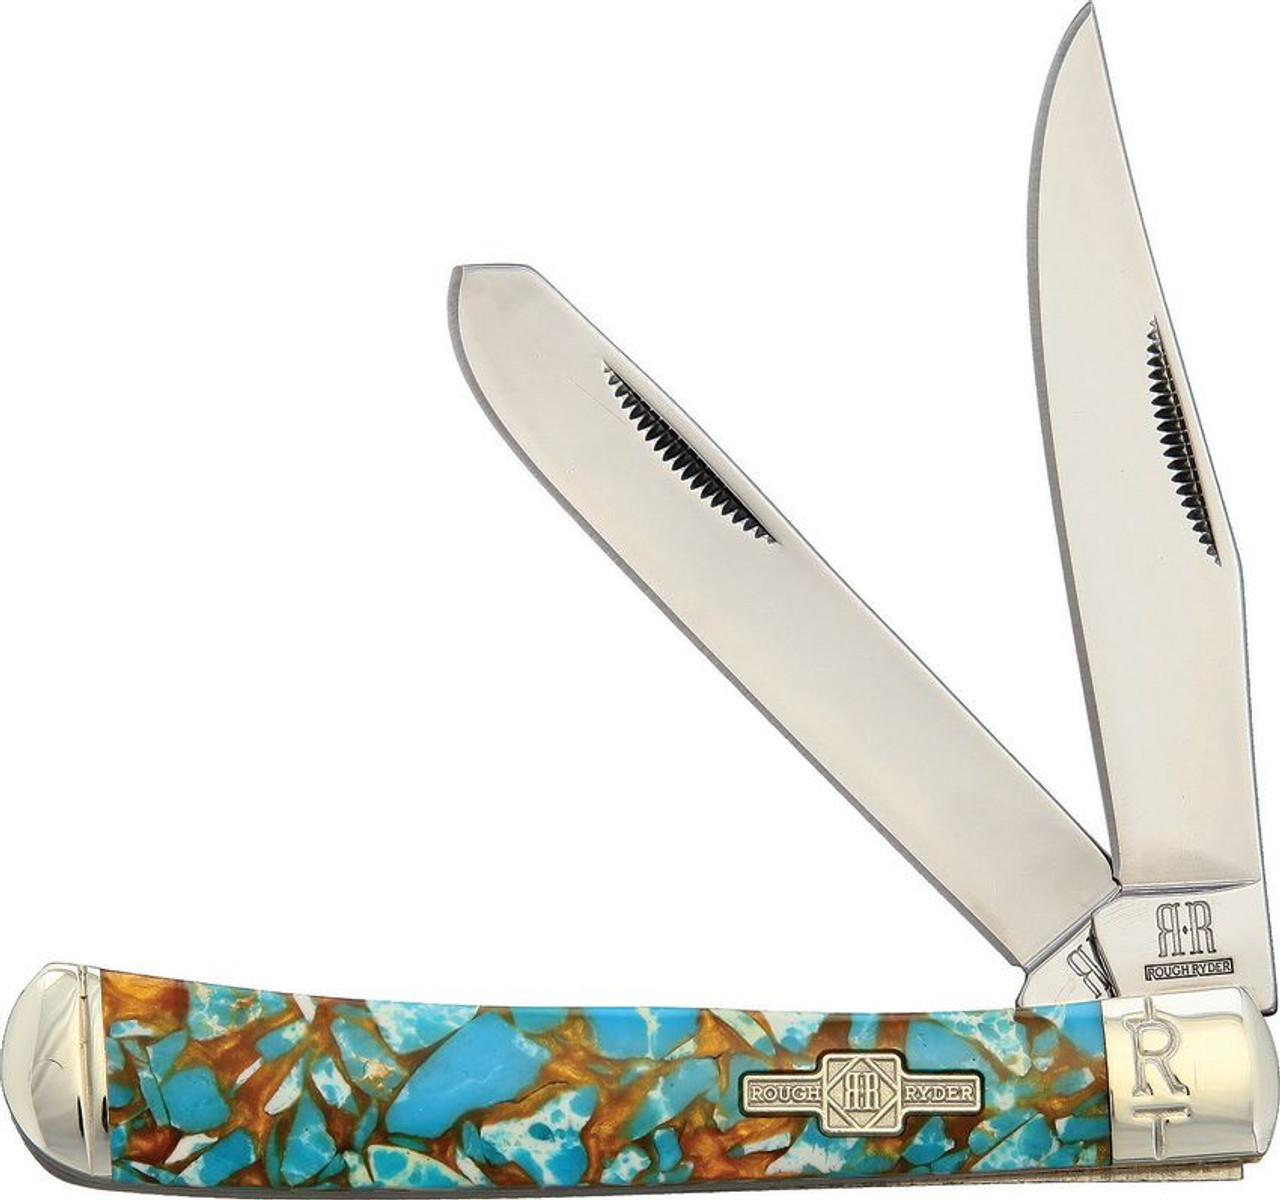 Rough Ryder Trapper (RR2001) 440A Stainless Steel Mirror Finished Clip and Spey Blade, Amber and Turquoise Stone Handle, Nickel Silver Bolsters